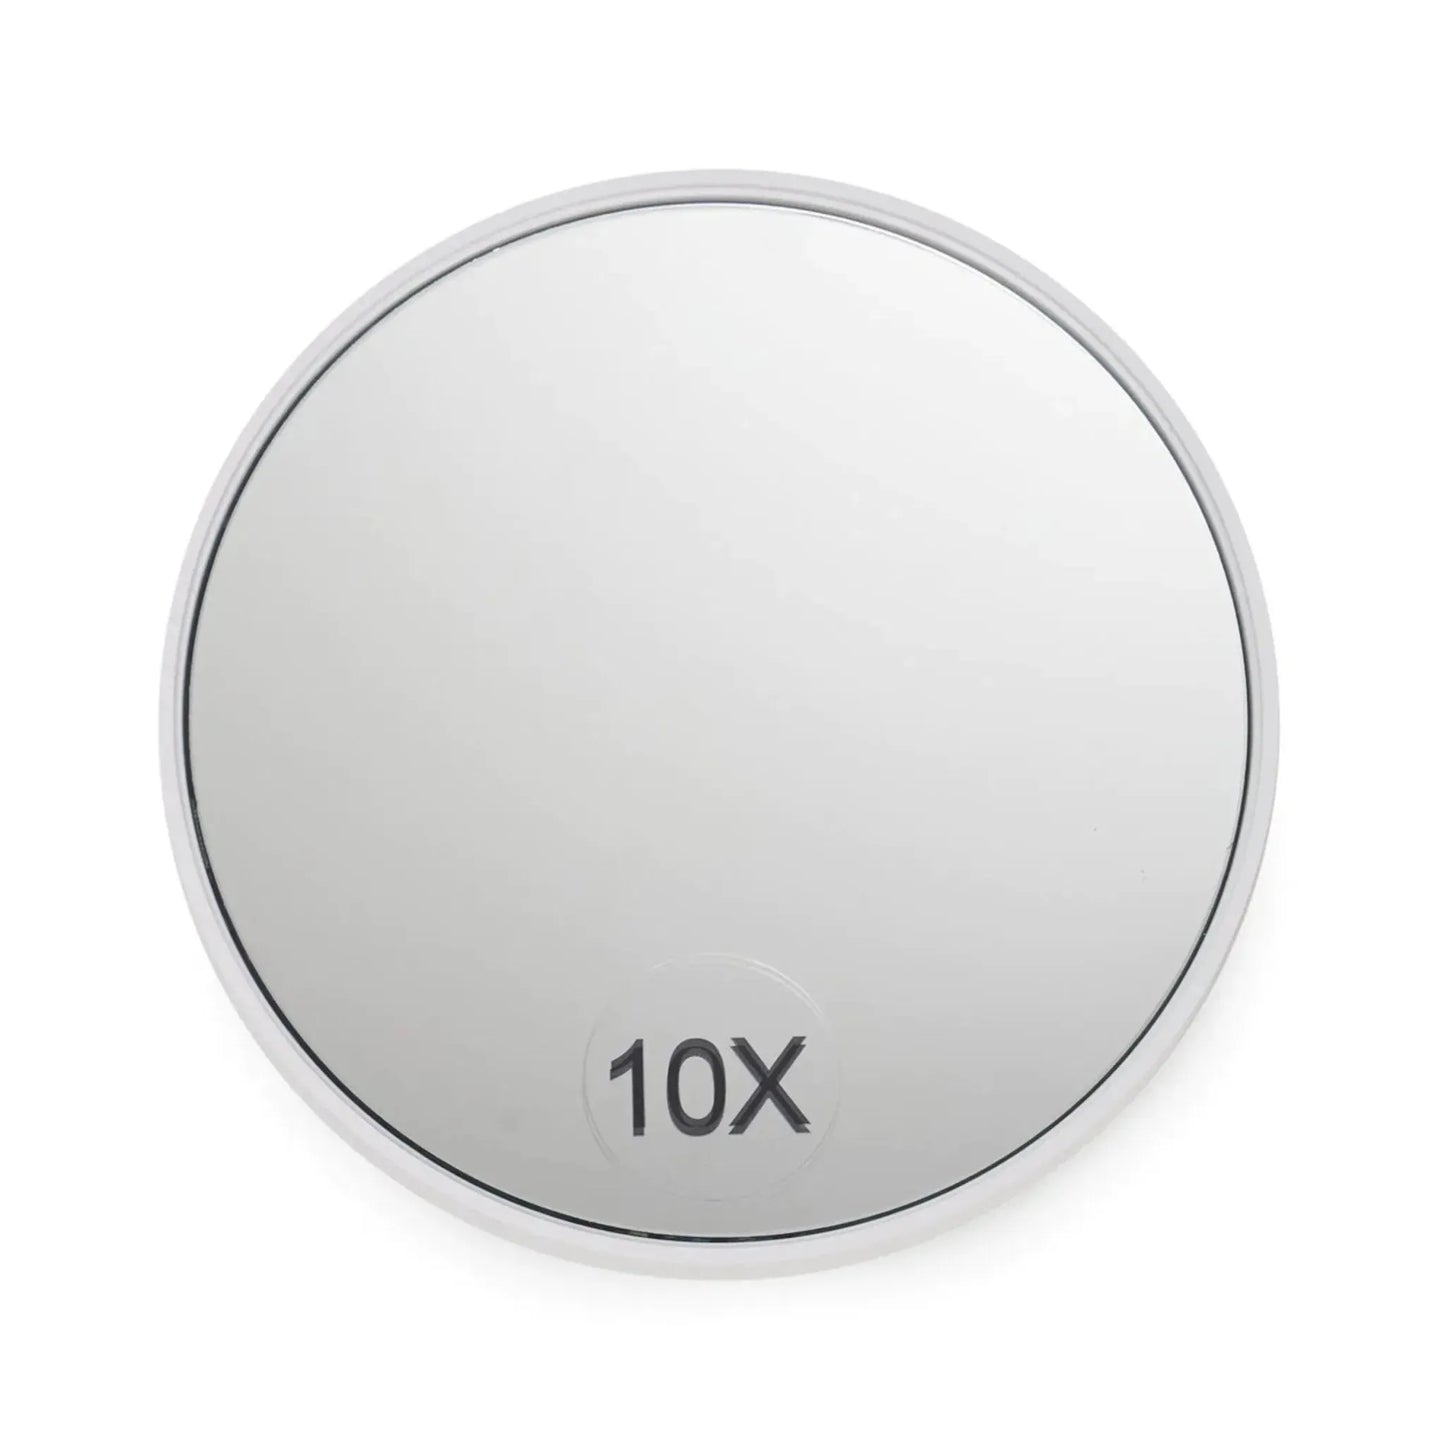 10x magnifying mirrors